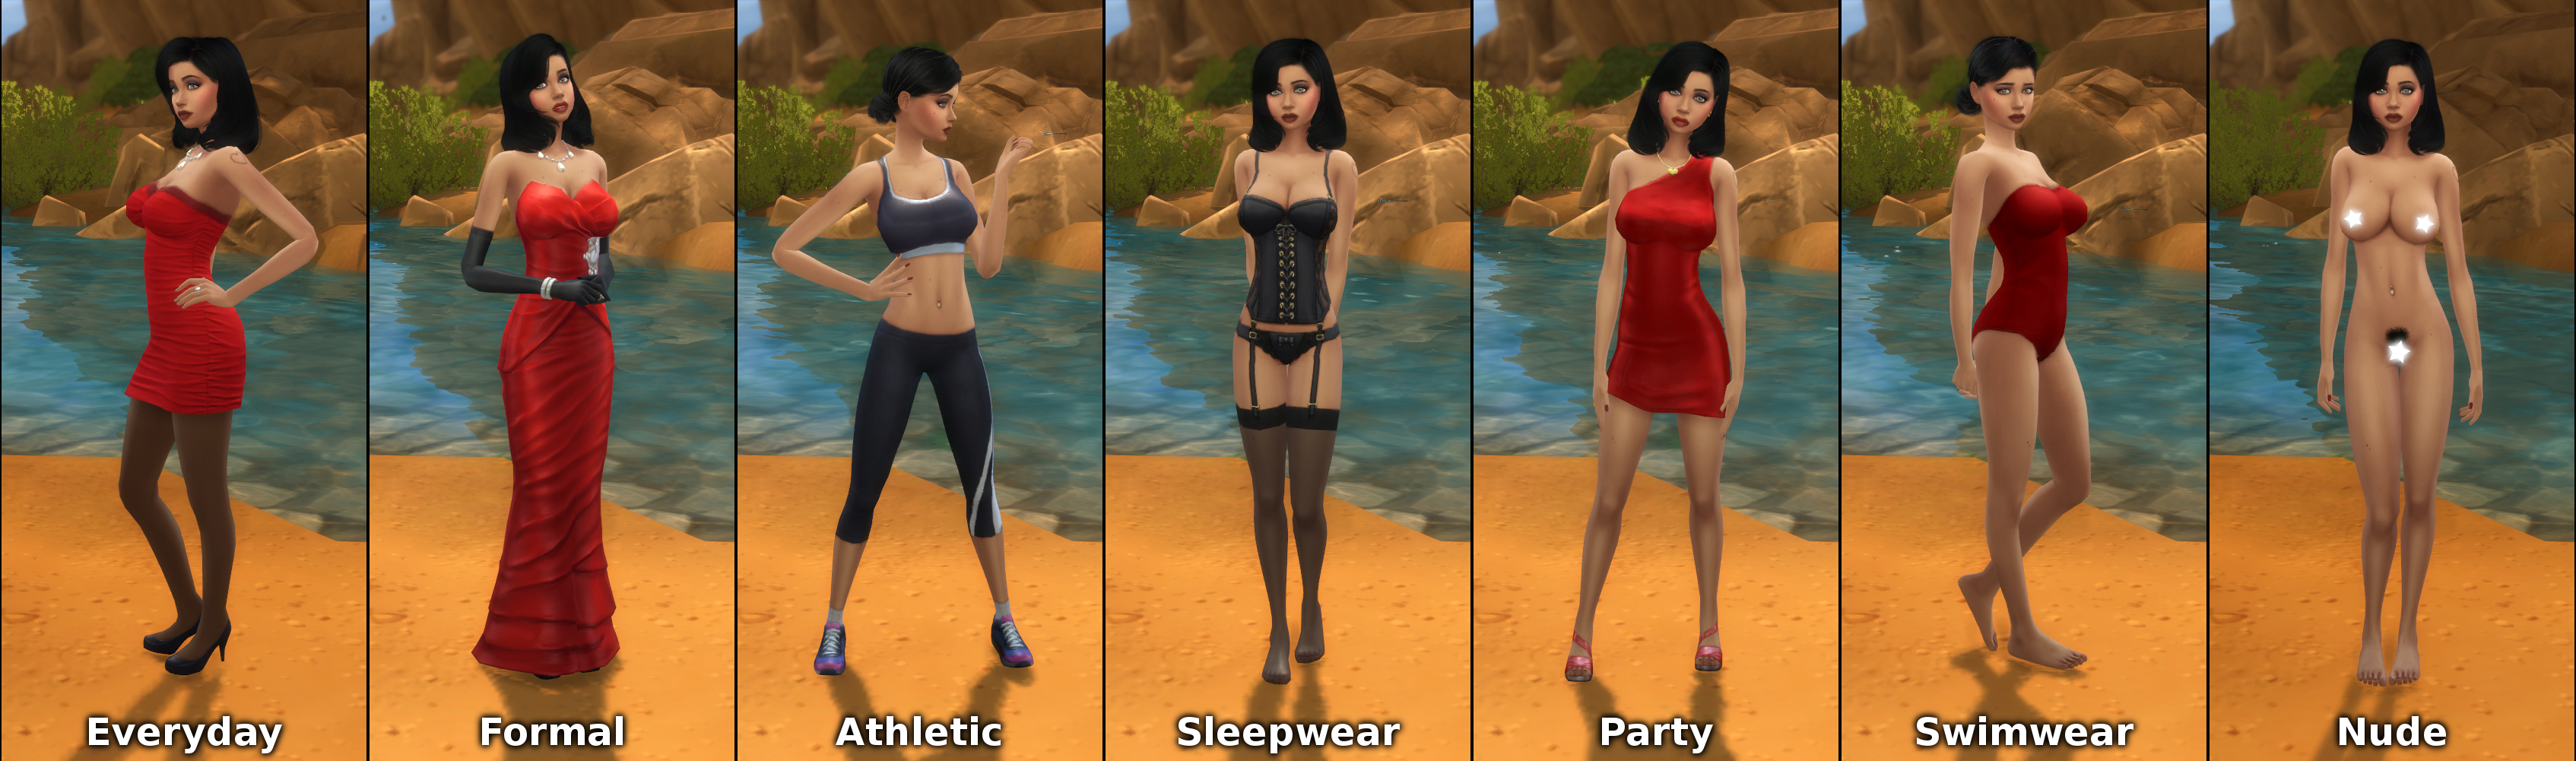 Sims 4 Erplederps Hot Sims Sexy Sims For Your Whims 160818